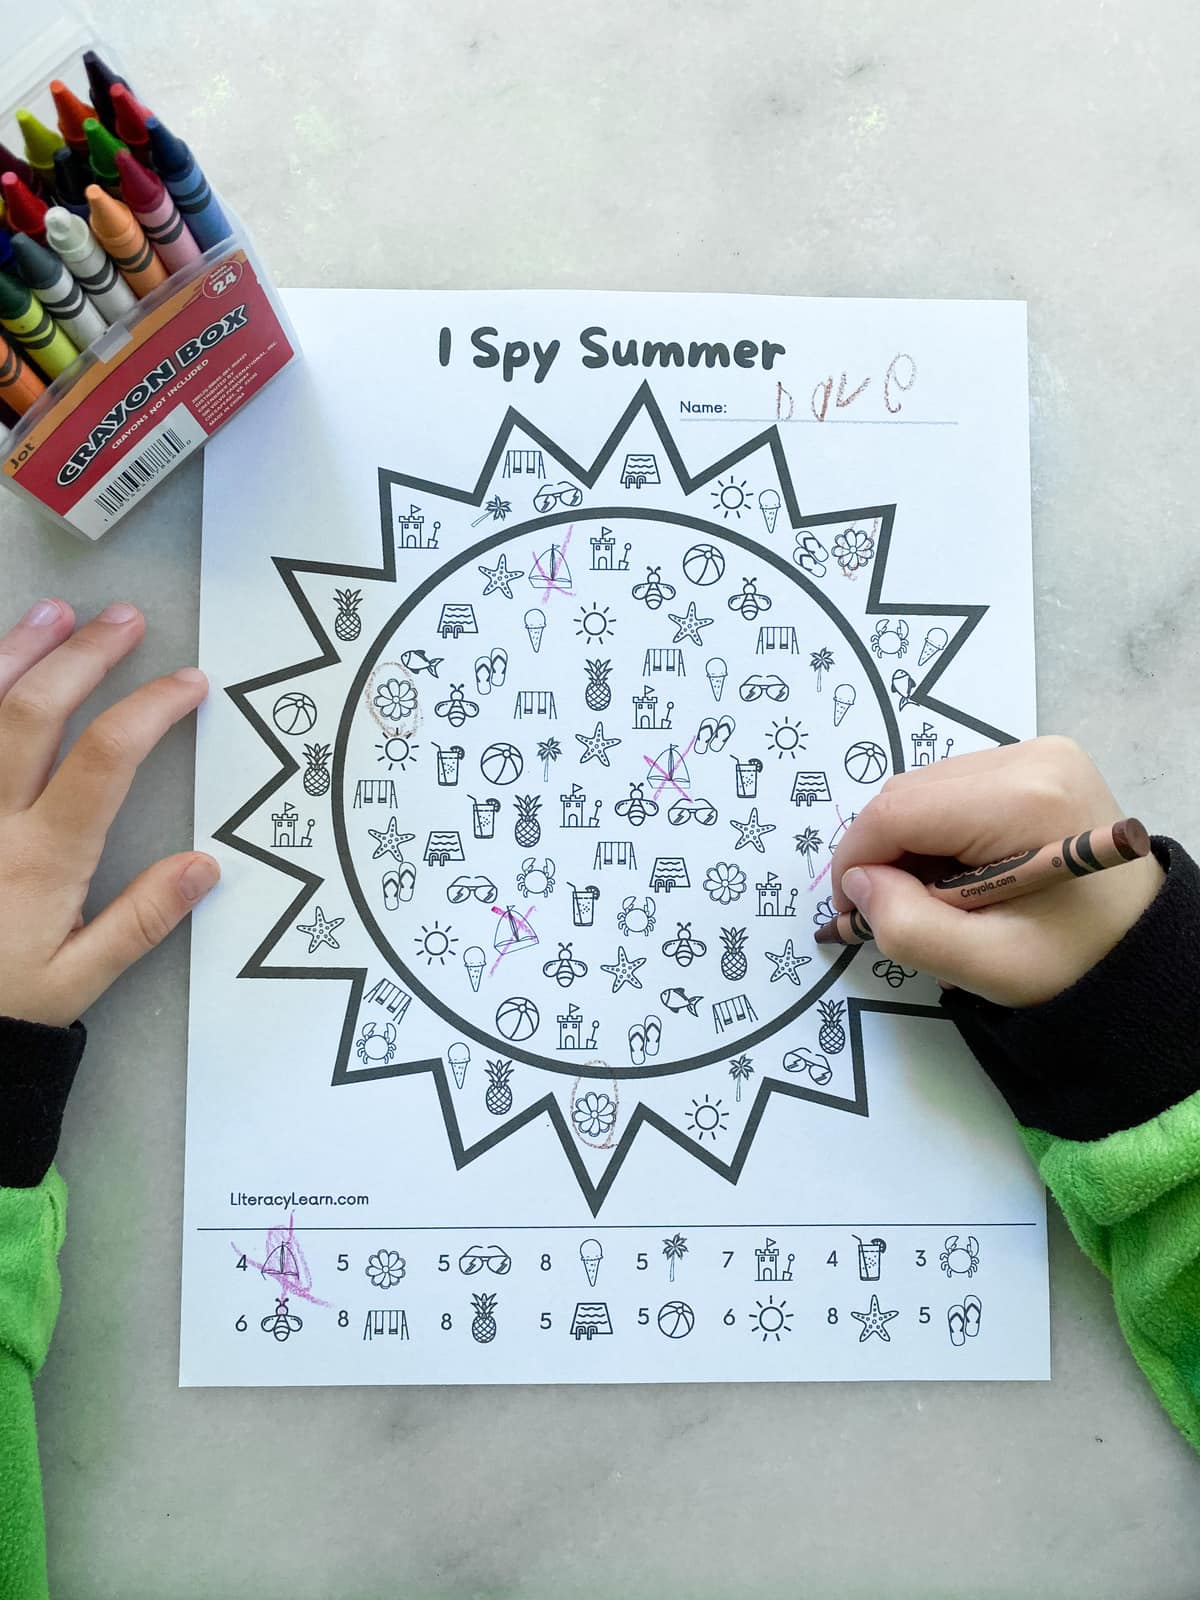 A child's hands completing the I Spy Summer worksheet with crayons.